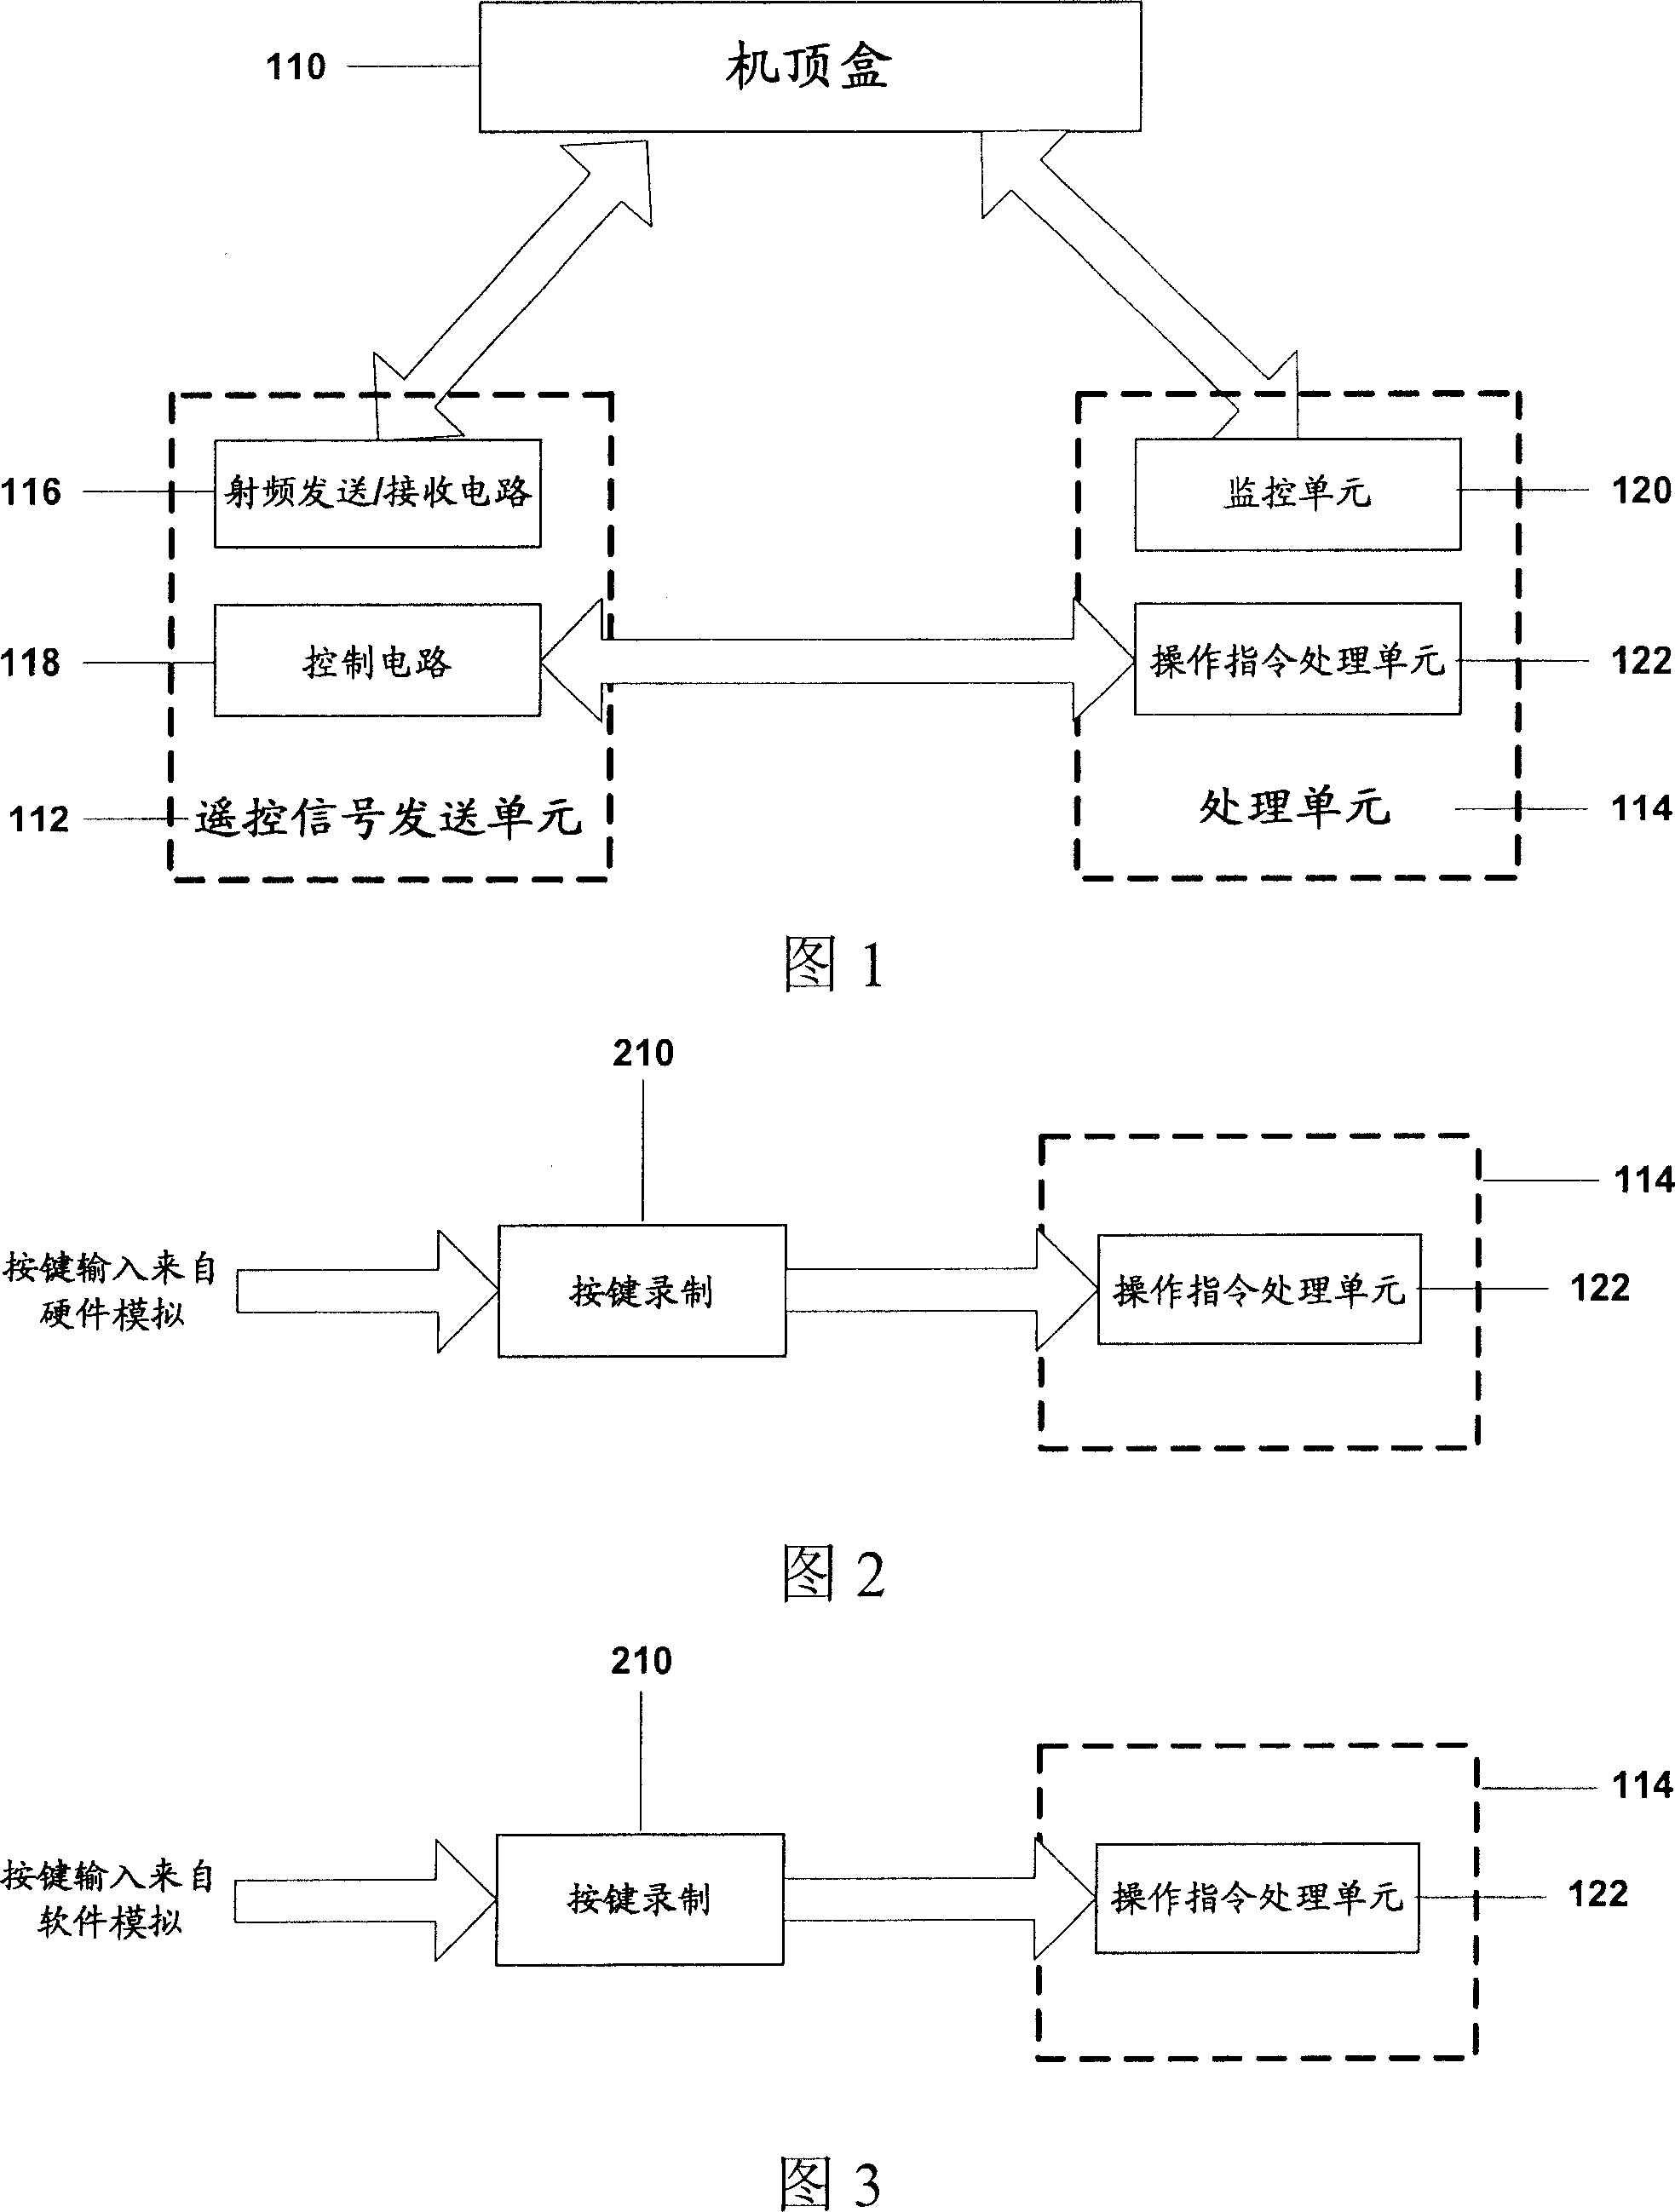 A test system and method for set top box